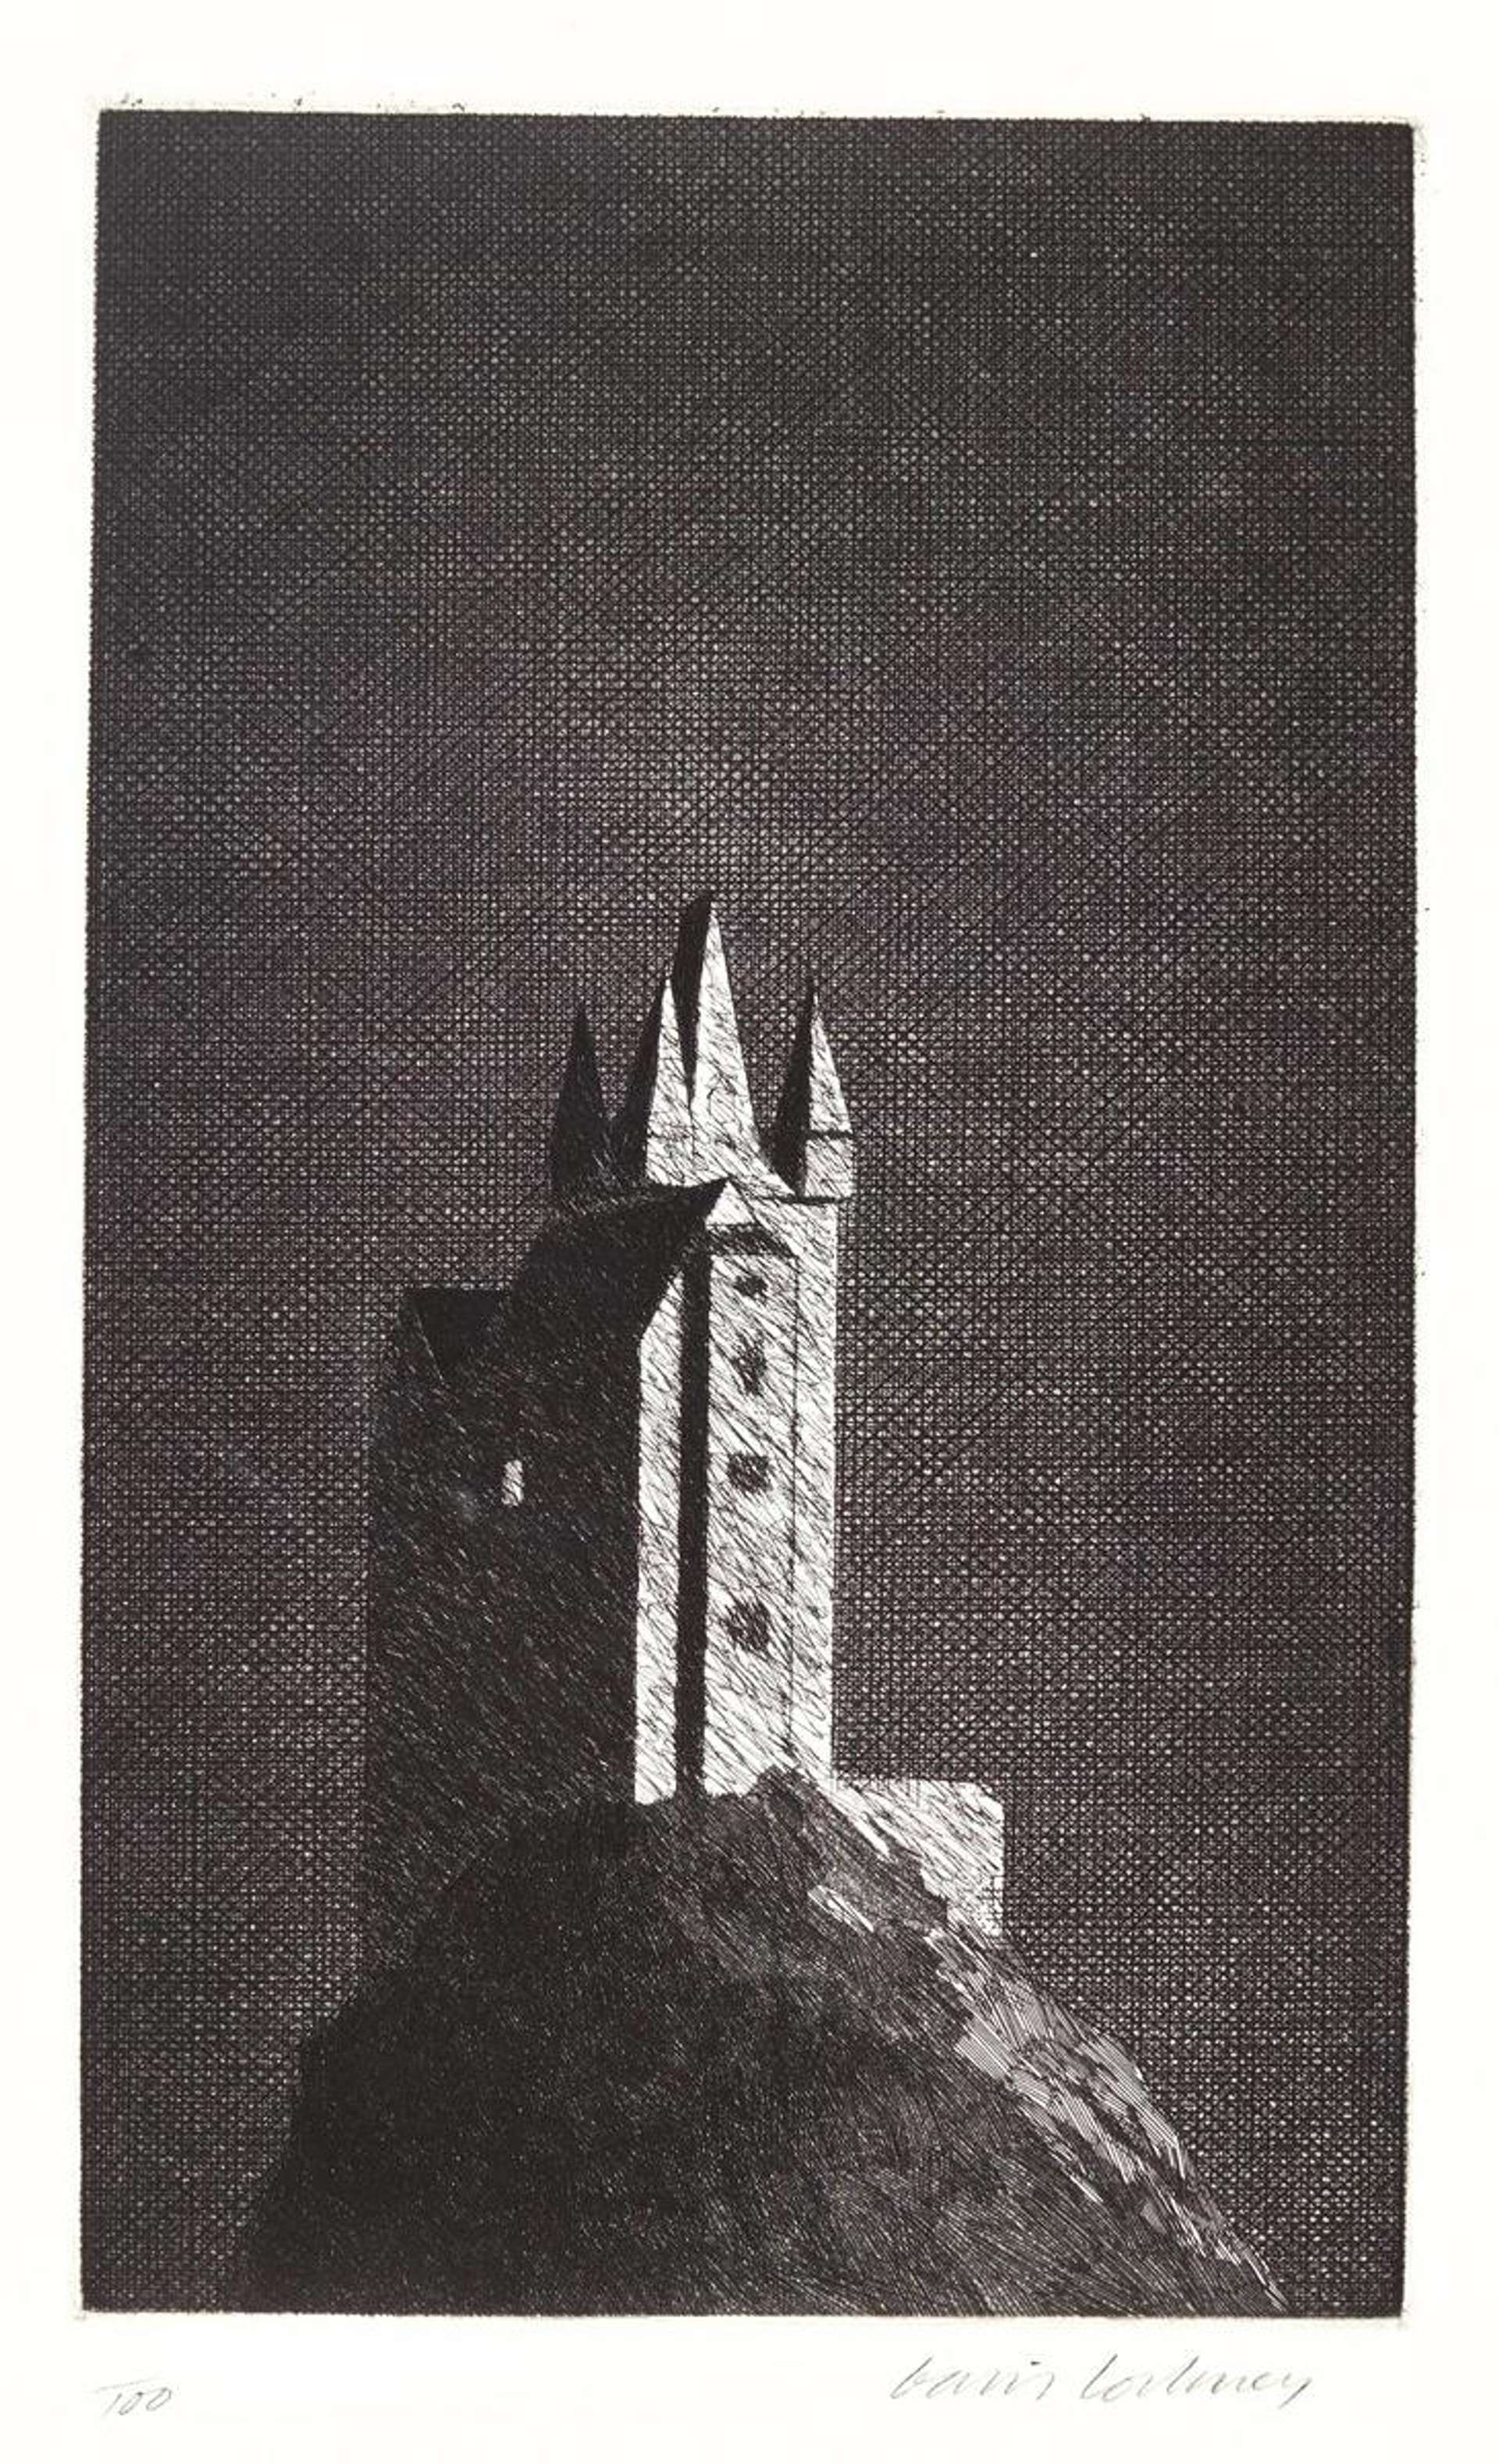 Shaded grey against a dark background of cross hatched marks, a castle with with high turret, pointed spires and narrow windows sits alone on a fuzzy mound.